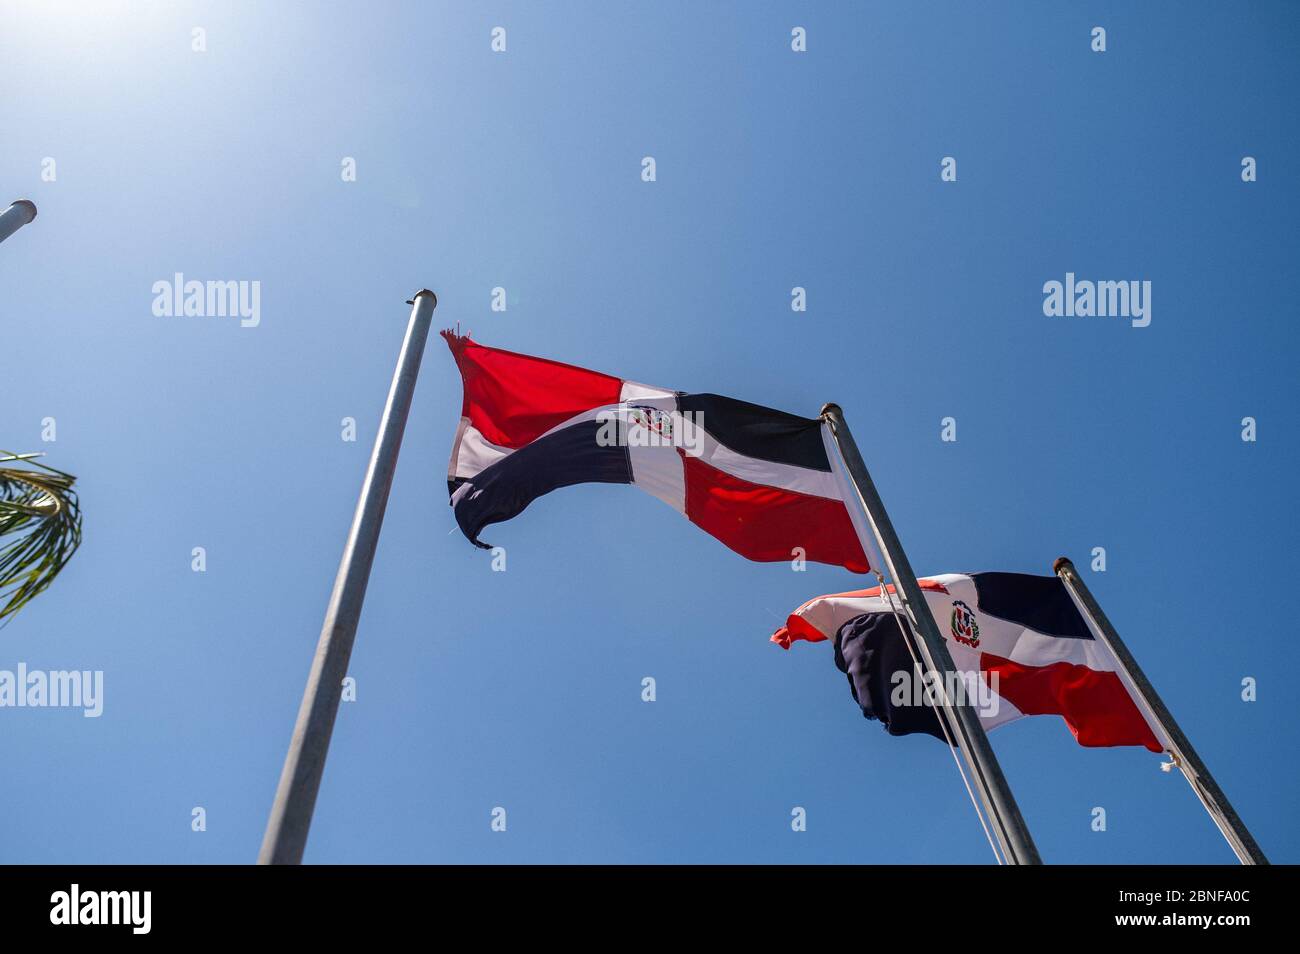 Low angle shot of the flags of the Dominican Republic on metal poles near palm trees Stock Photo